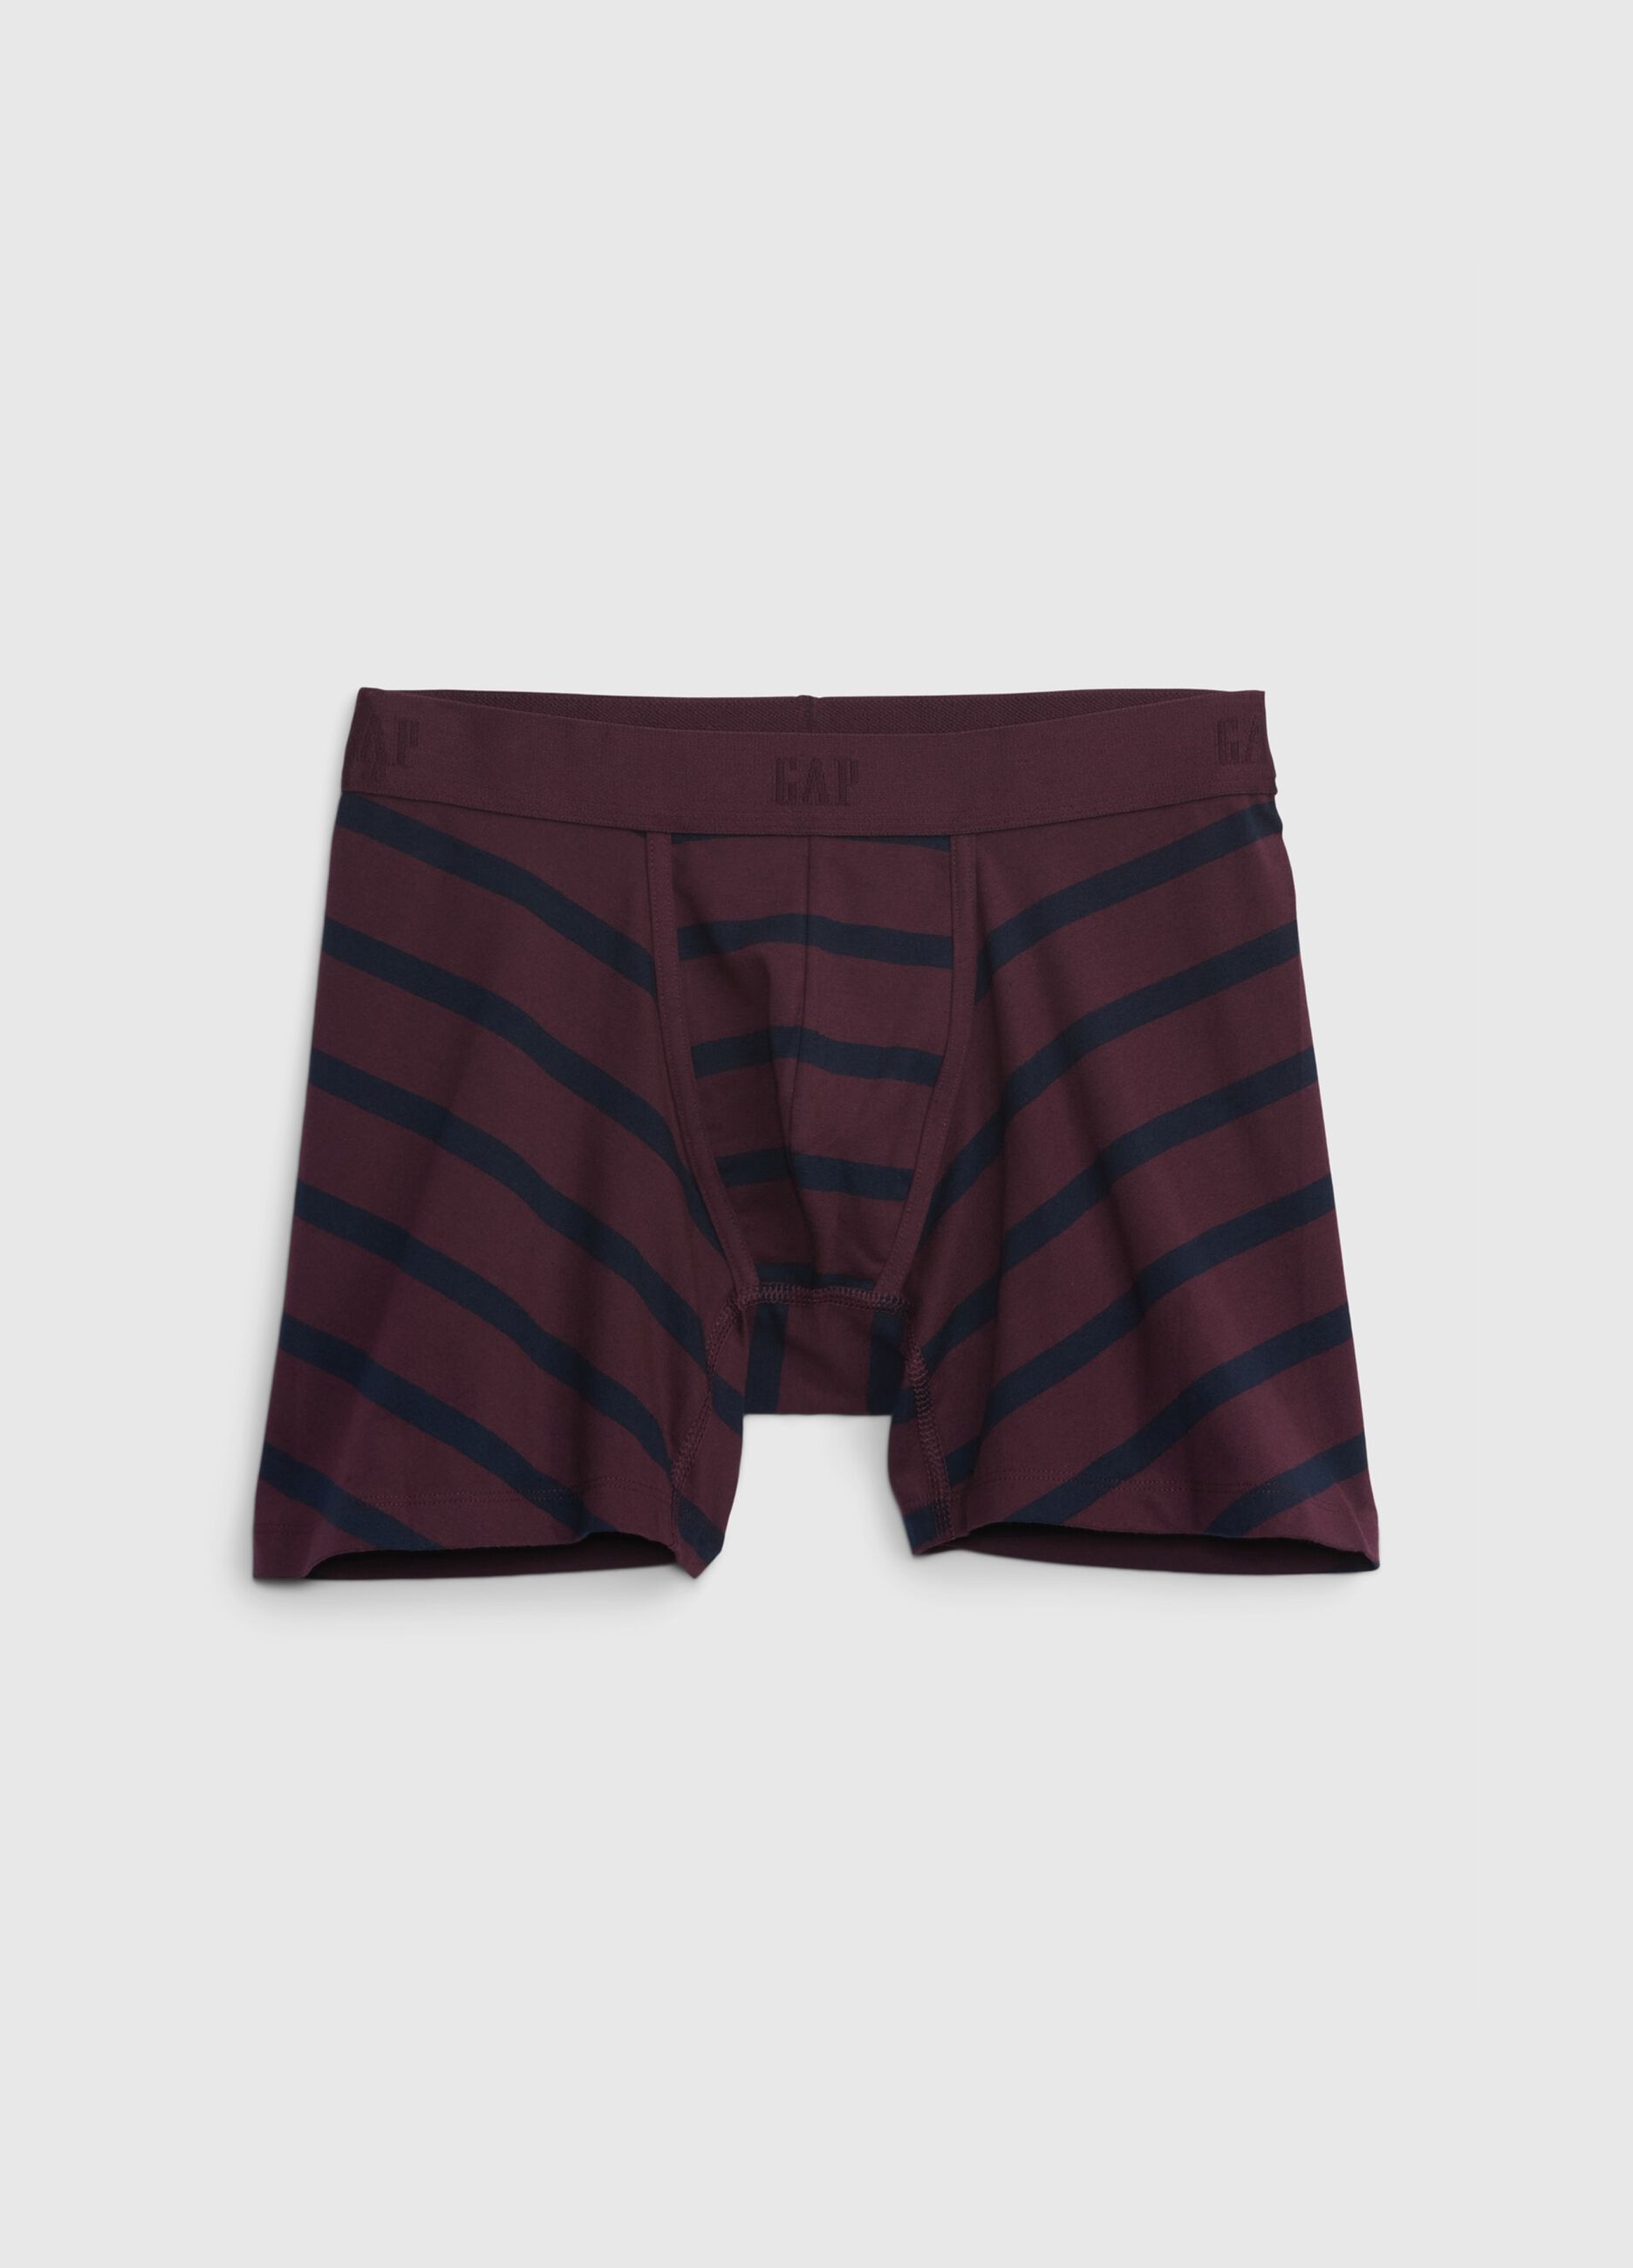 Boxer shorts with striped pattern